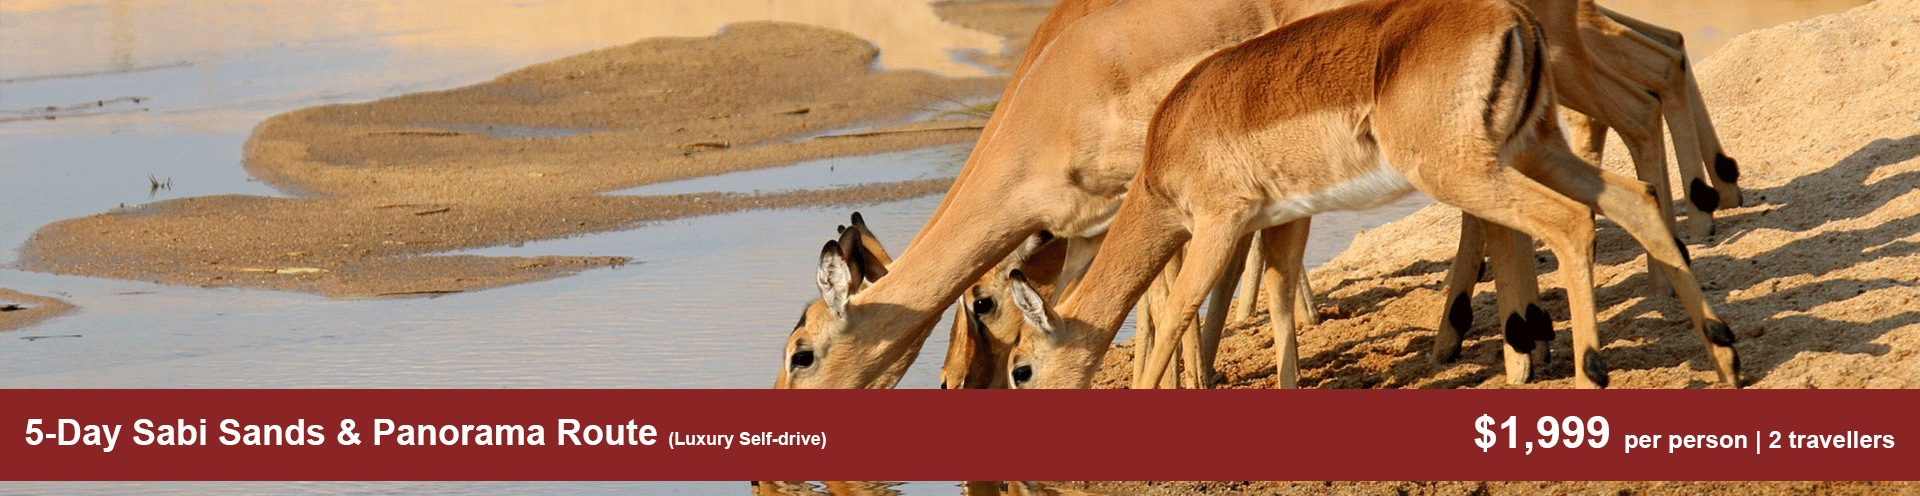 5-Day-Sabi-Sands-&-Panorama-Route-(Luxury-Self-drive)